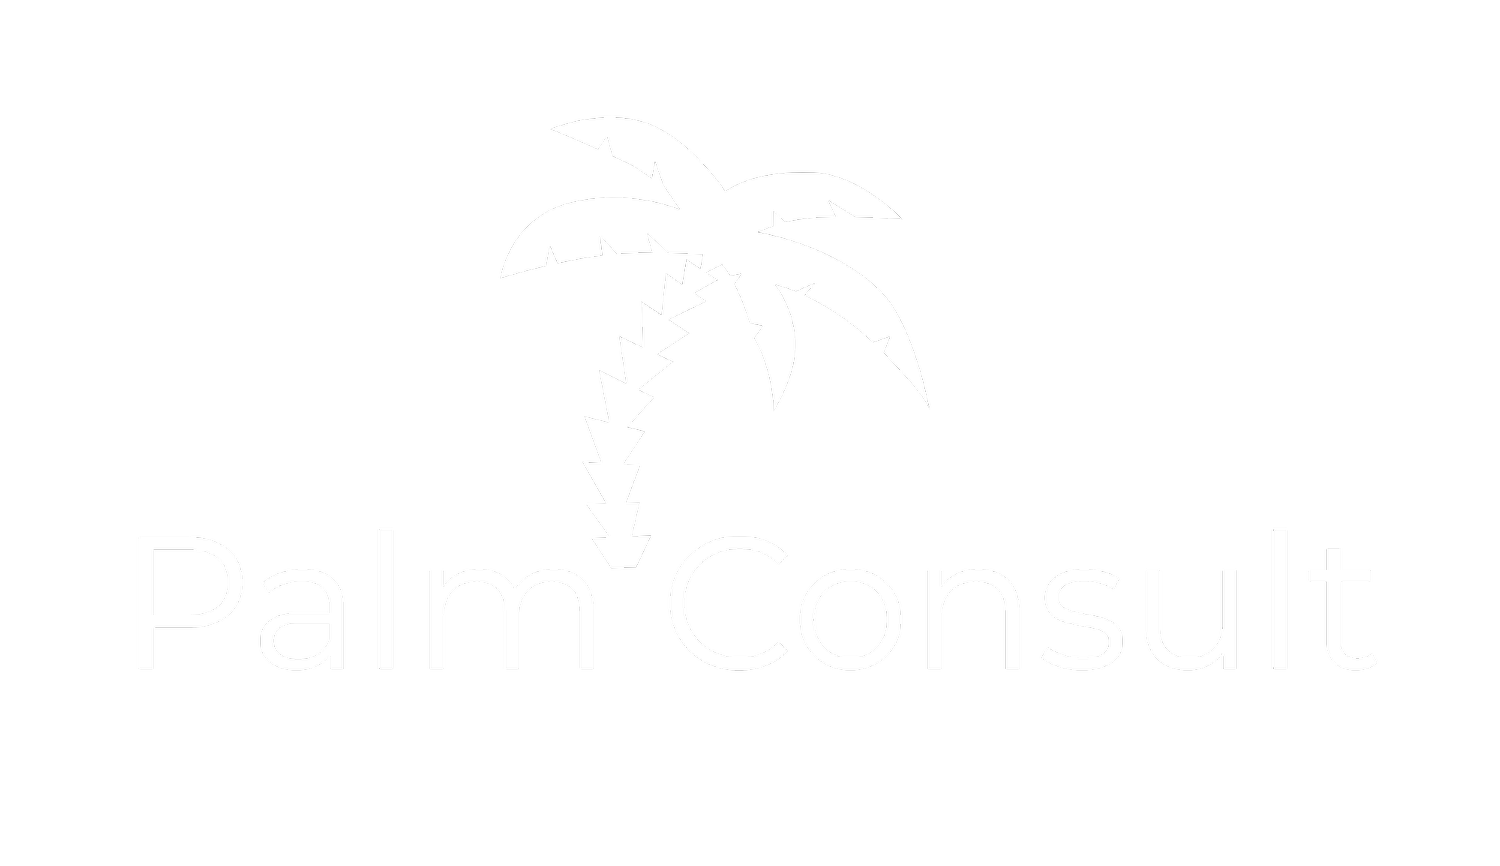 Palm Consult